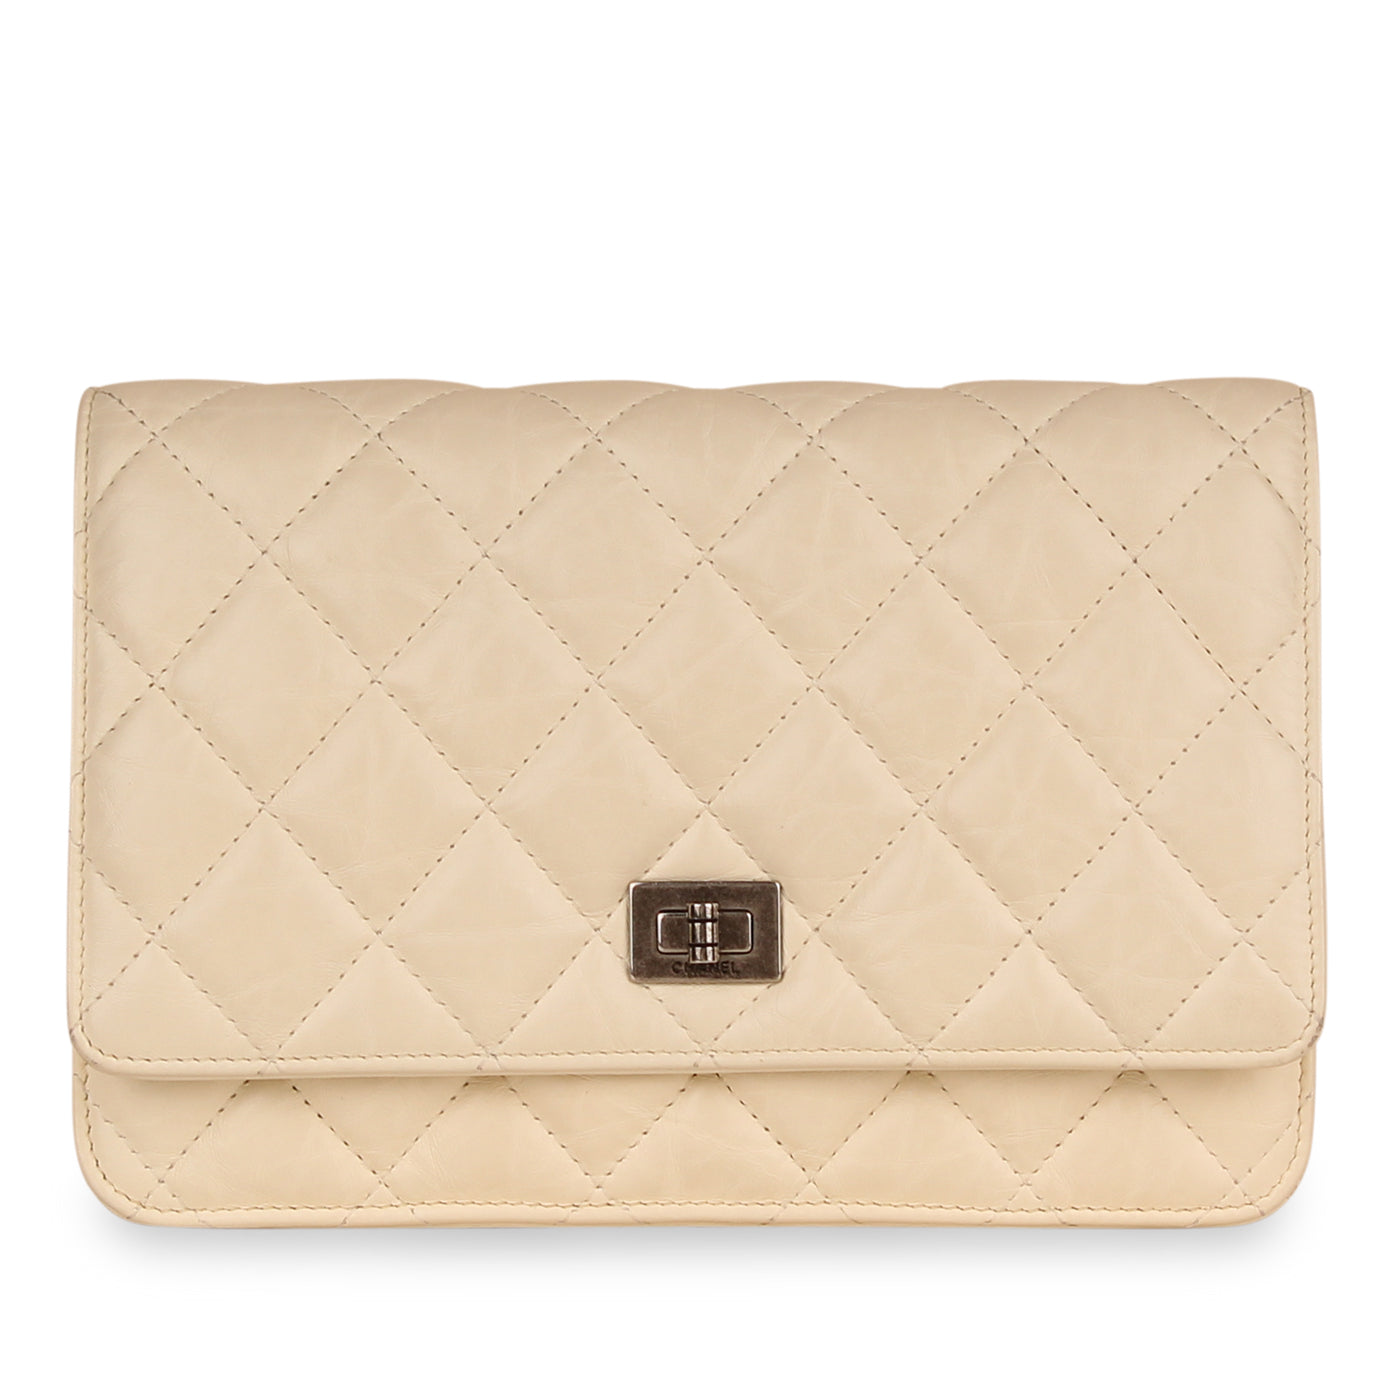 Chanel - Re-issue Wallet on Chain - Cream